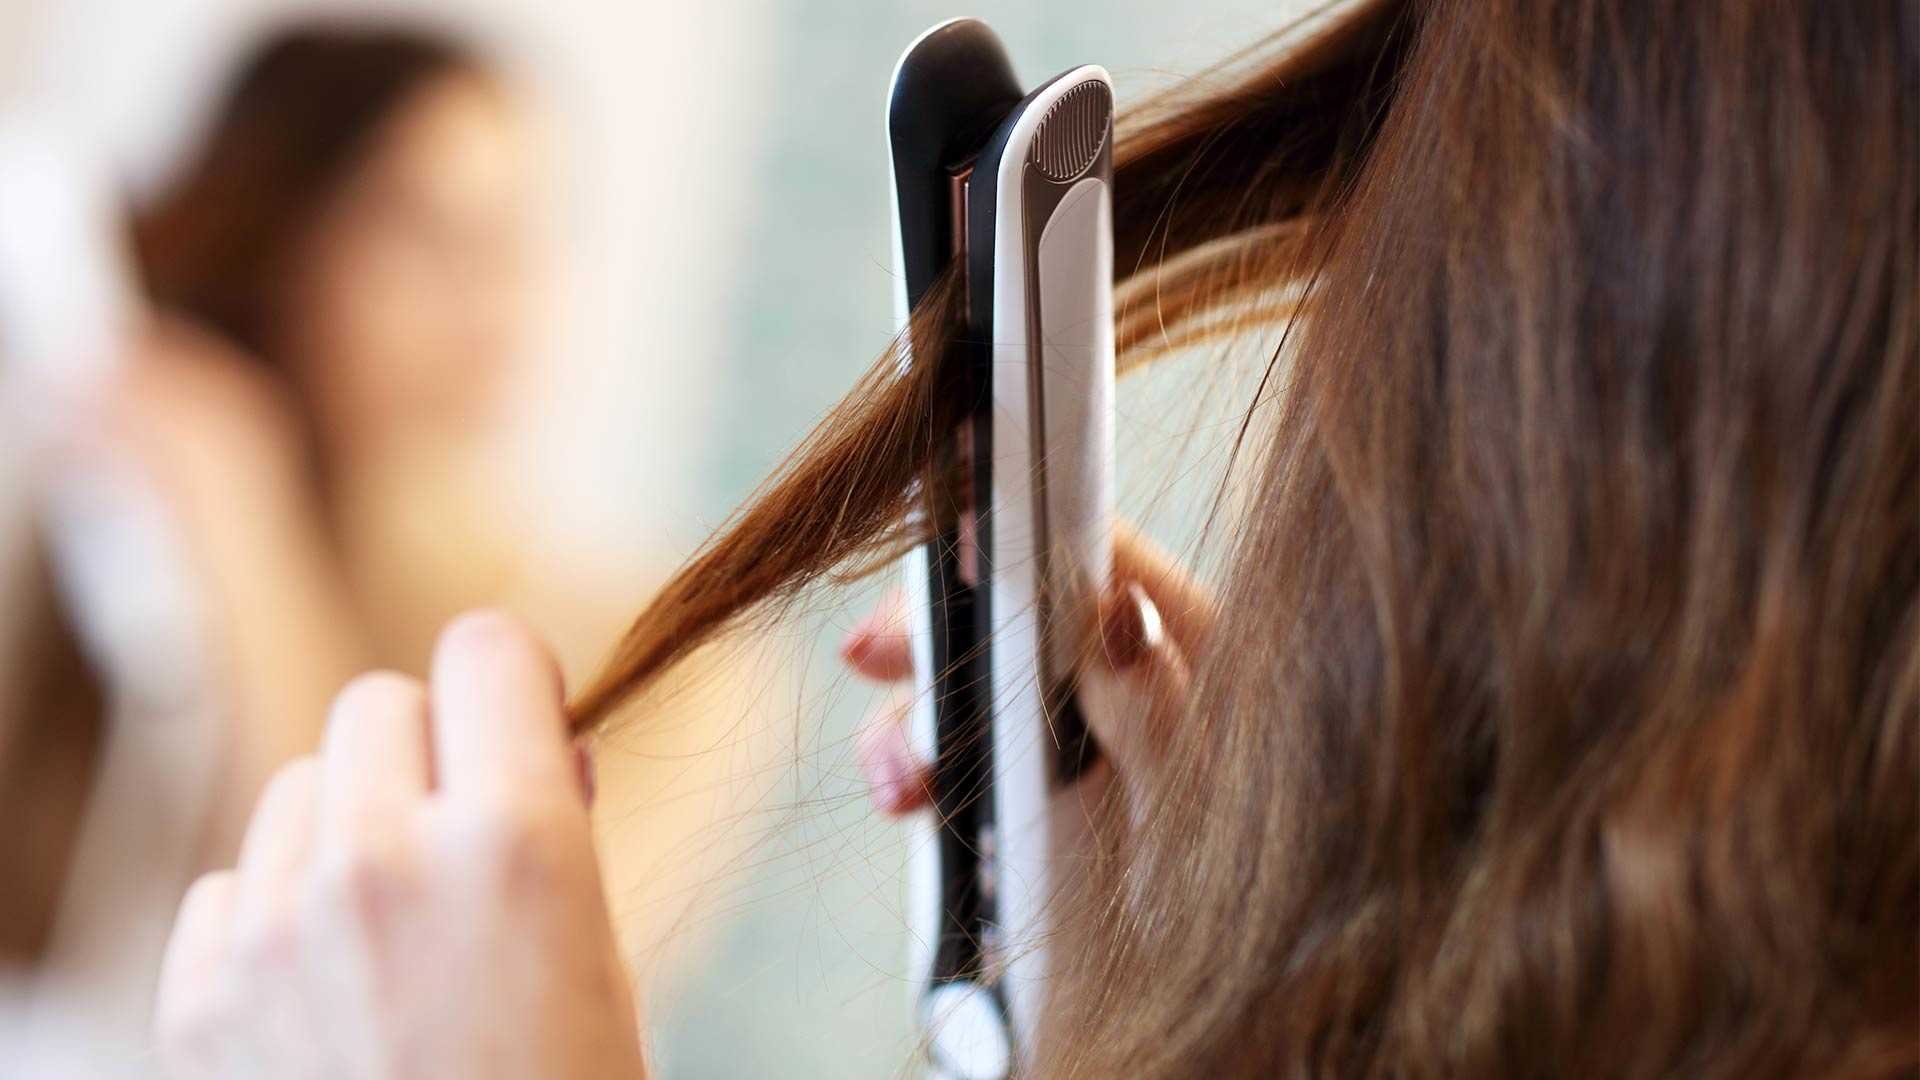 How To Care For and Prevent Burnt Hair - L'Oréal Paris